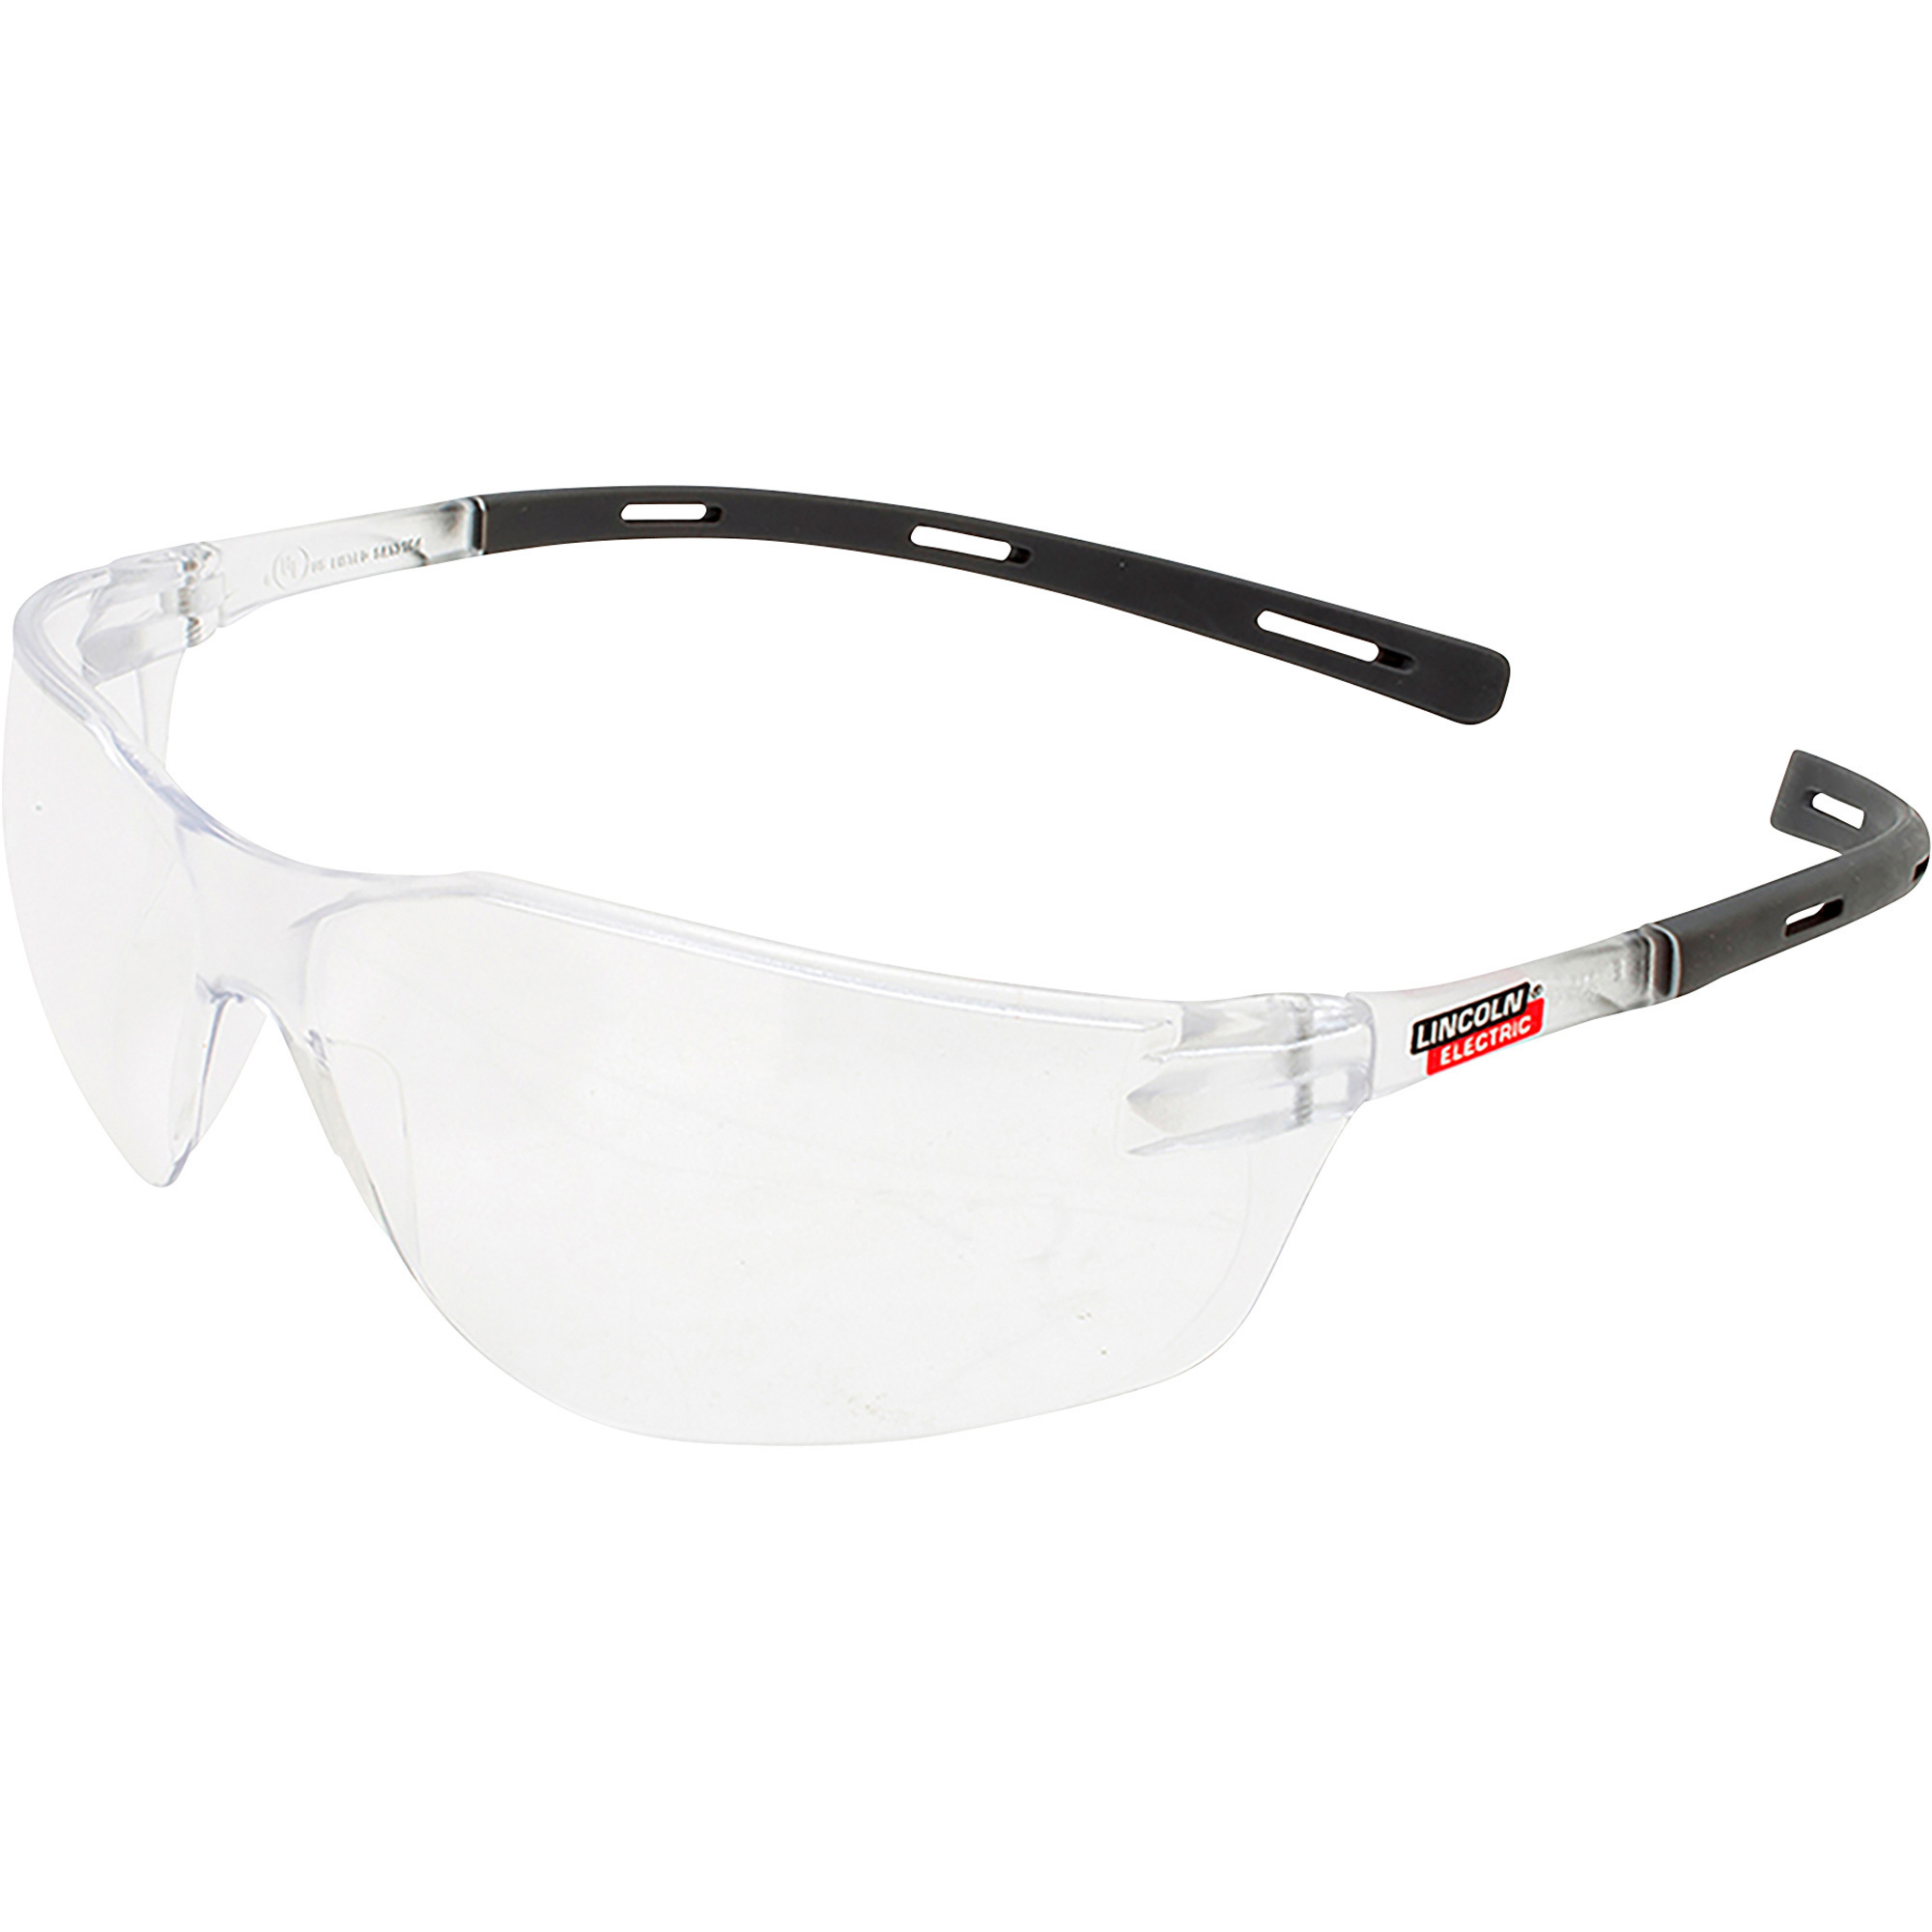 Lincoln Electric Protective Safety Glasses, Clear/Black Frame, Clear Lens, Model K3687-1